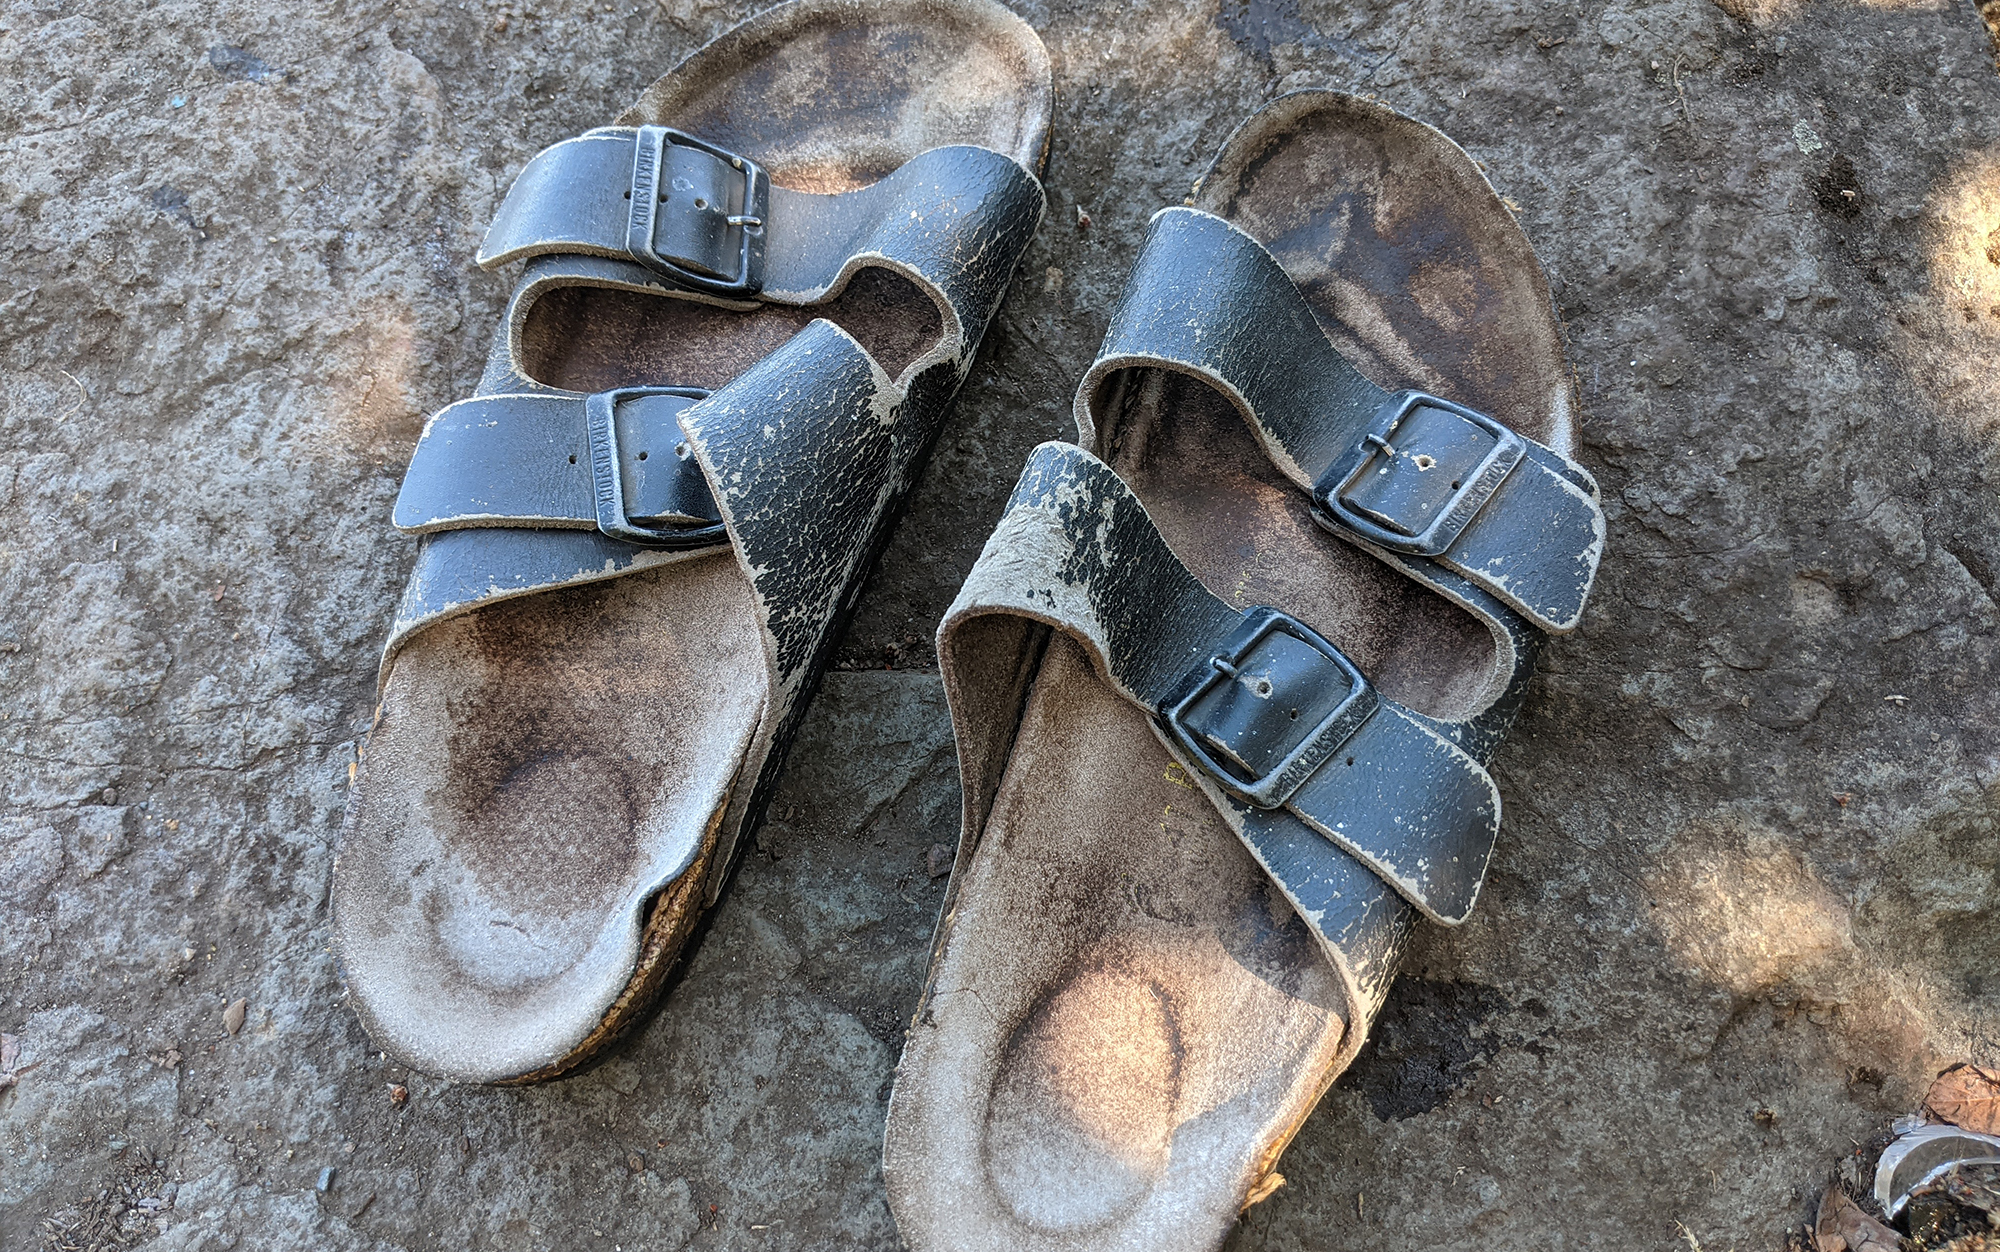 Have these Birkenstocks seen better days? Sure, but as the oldest shoe in my closet by more than 15 years, they deserve some respect.